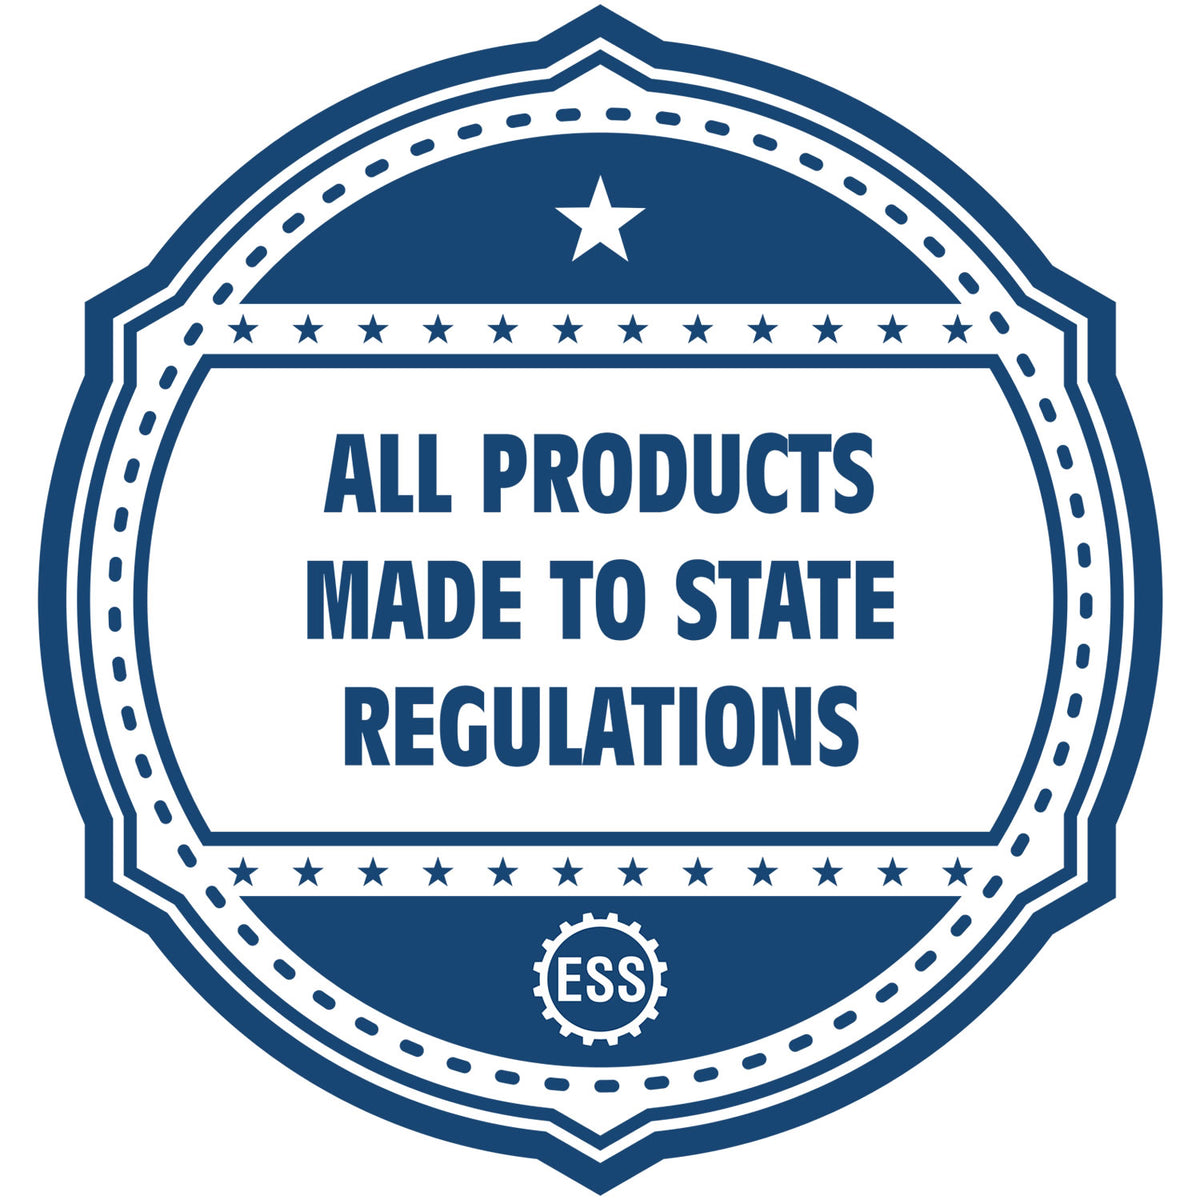 A blue icon or badge for the Gift Massachusetts Landscape Architect Seal showing that this product is made in compliance with state regulations.